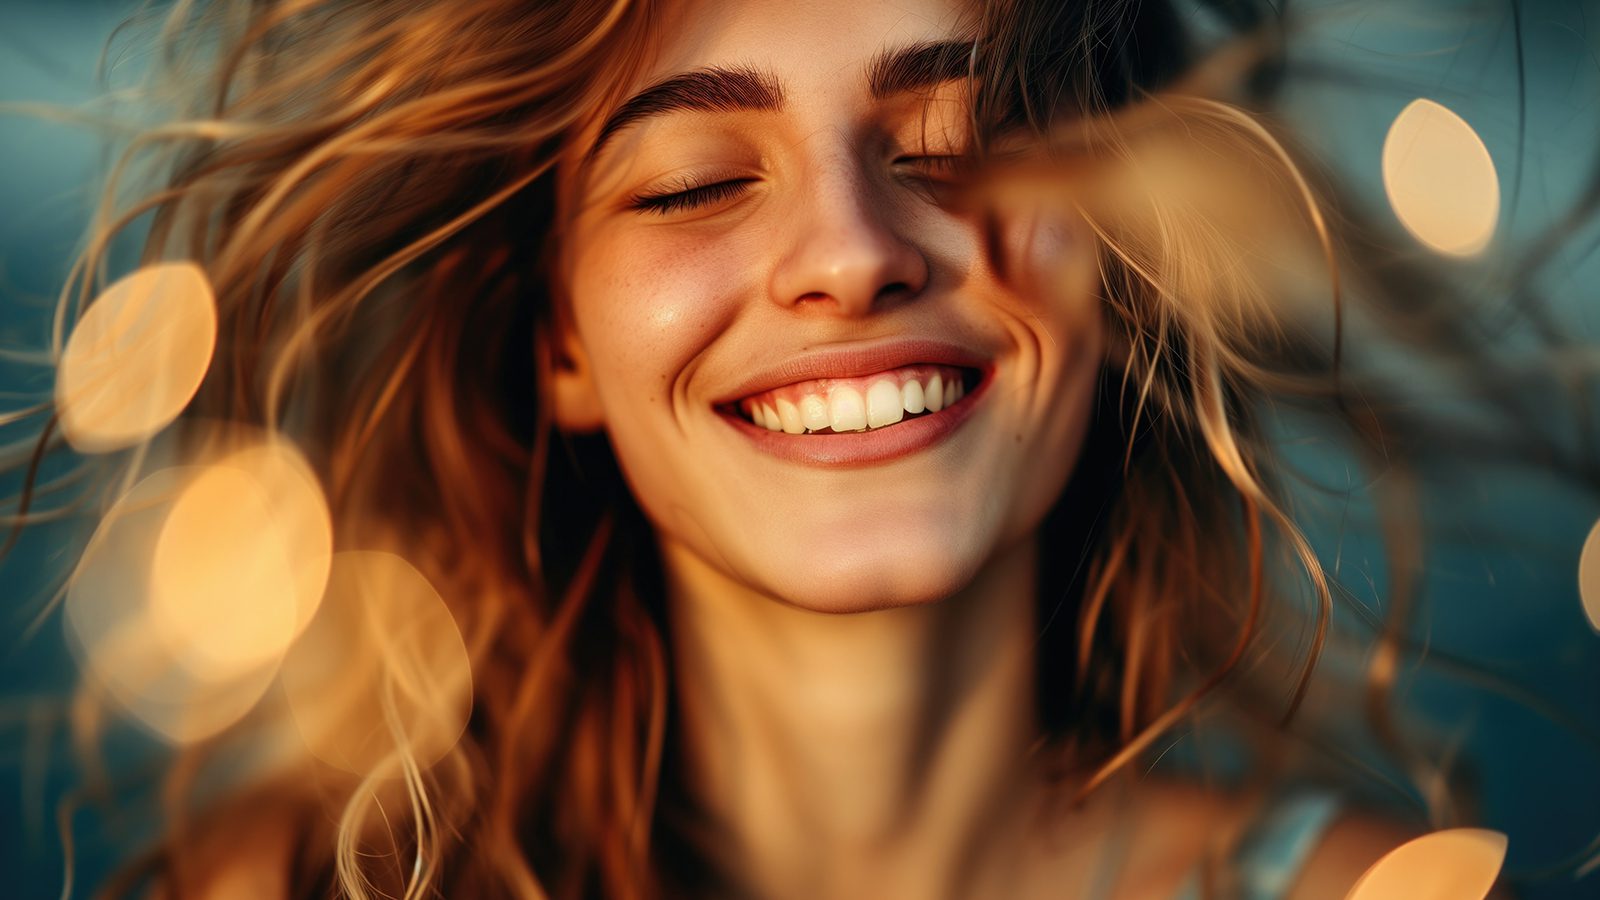 6 Ways That Smiling Changes the World